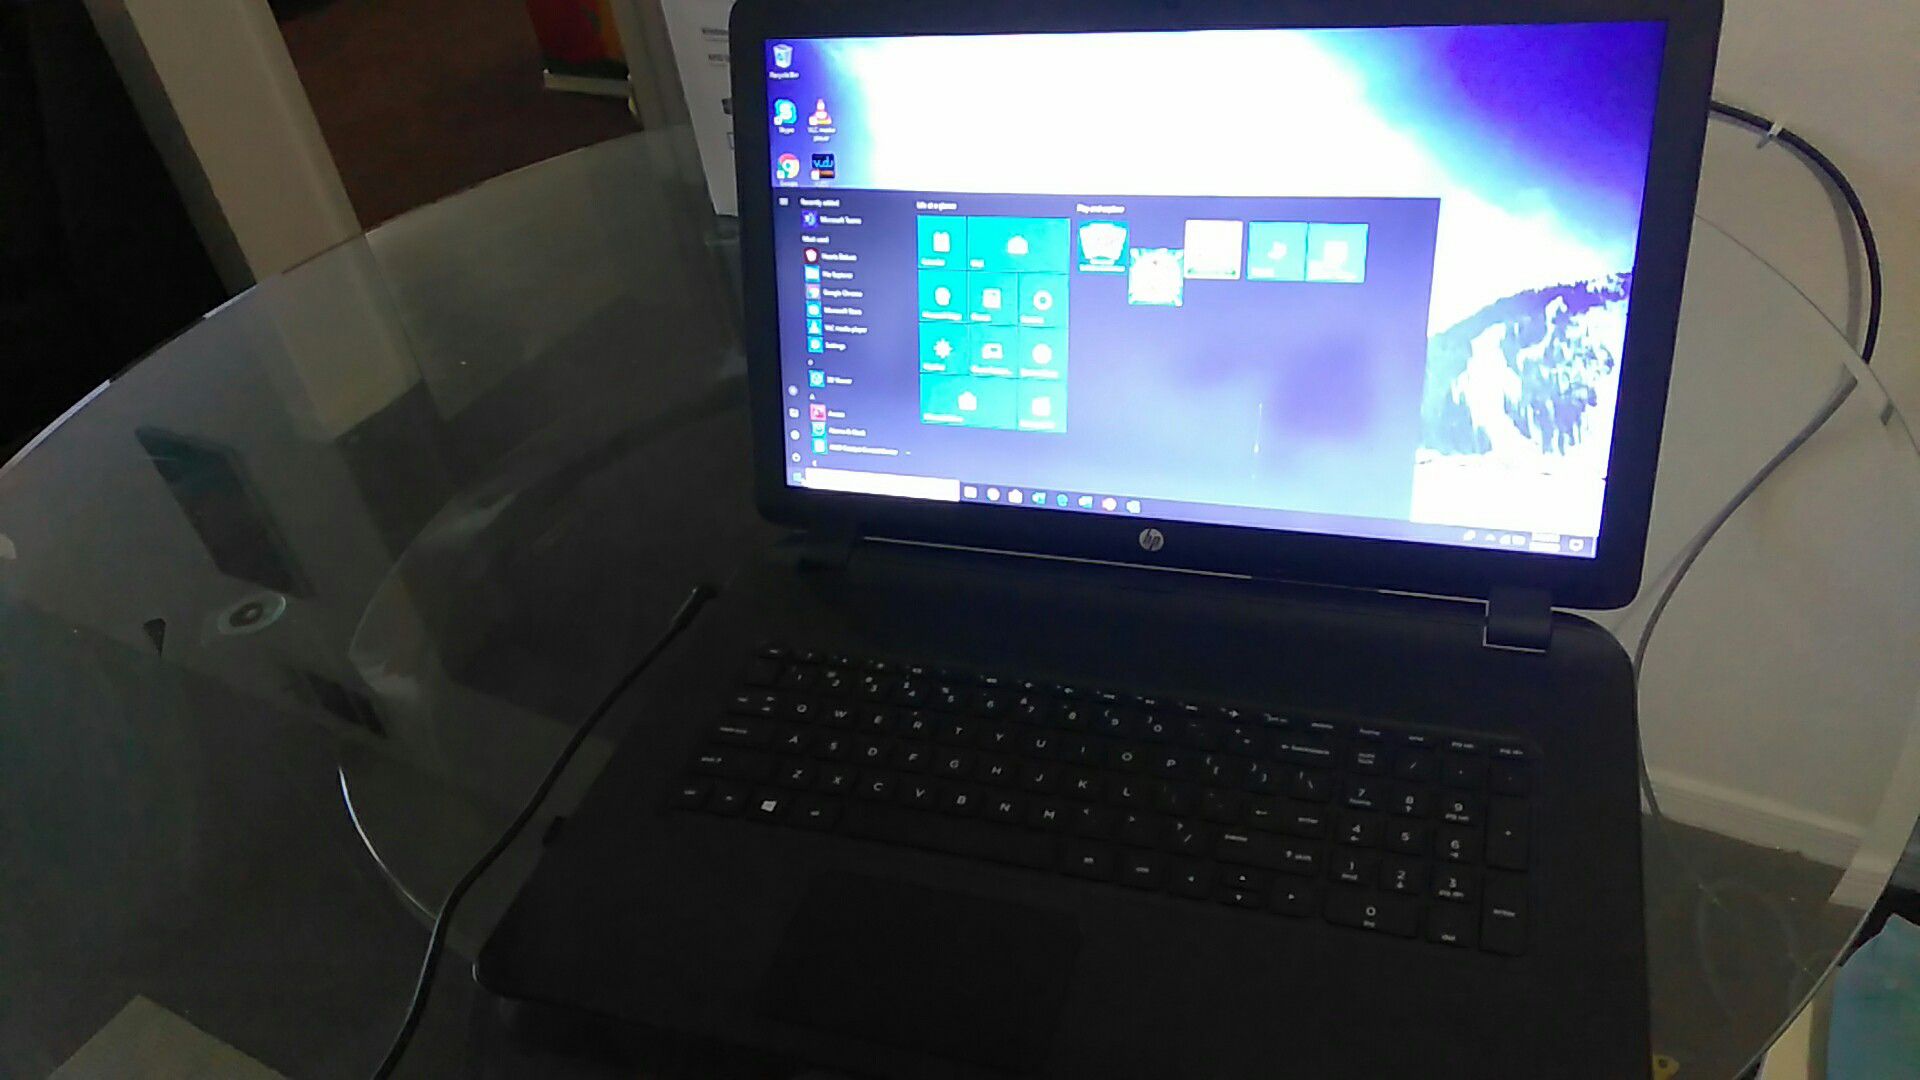 HP Notebook/Laptop quad-core with 17.3" diagonal display.